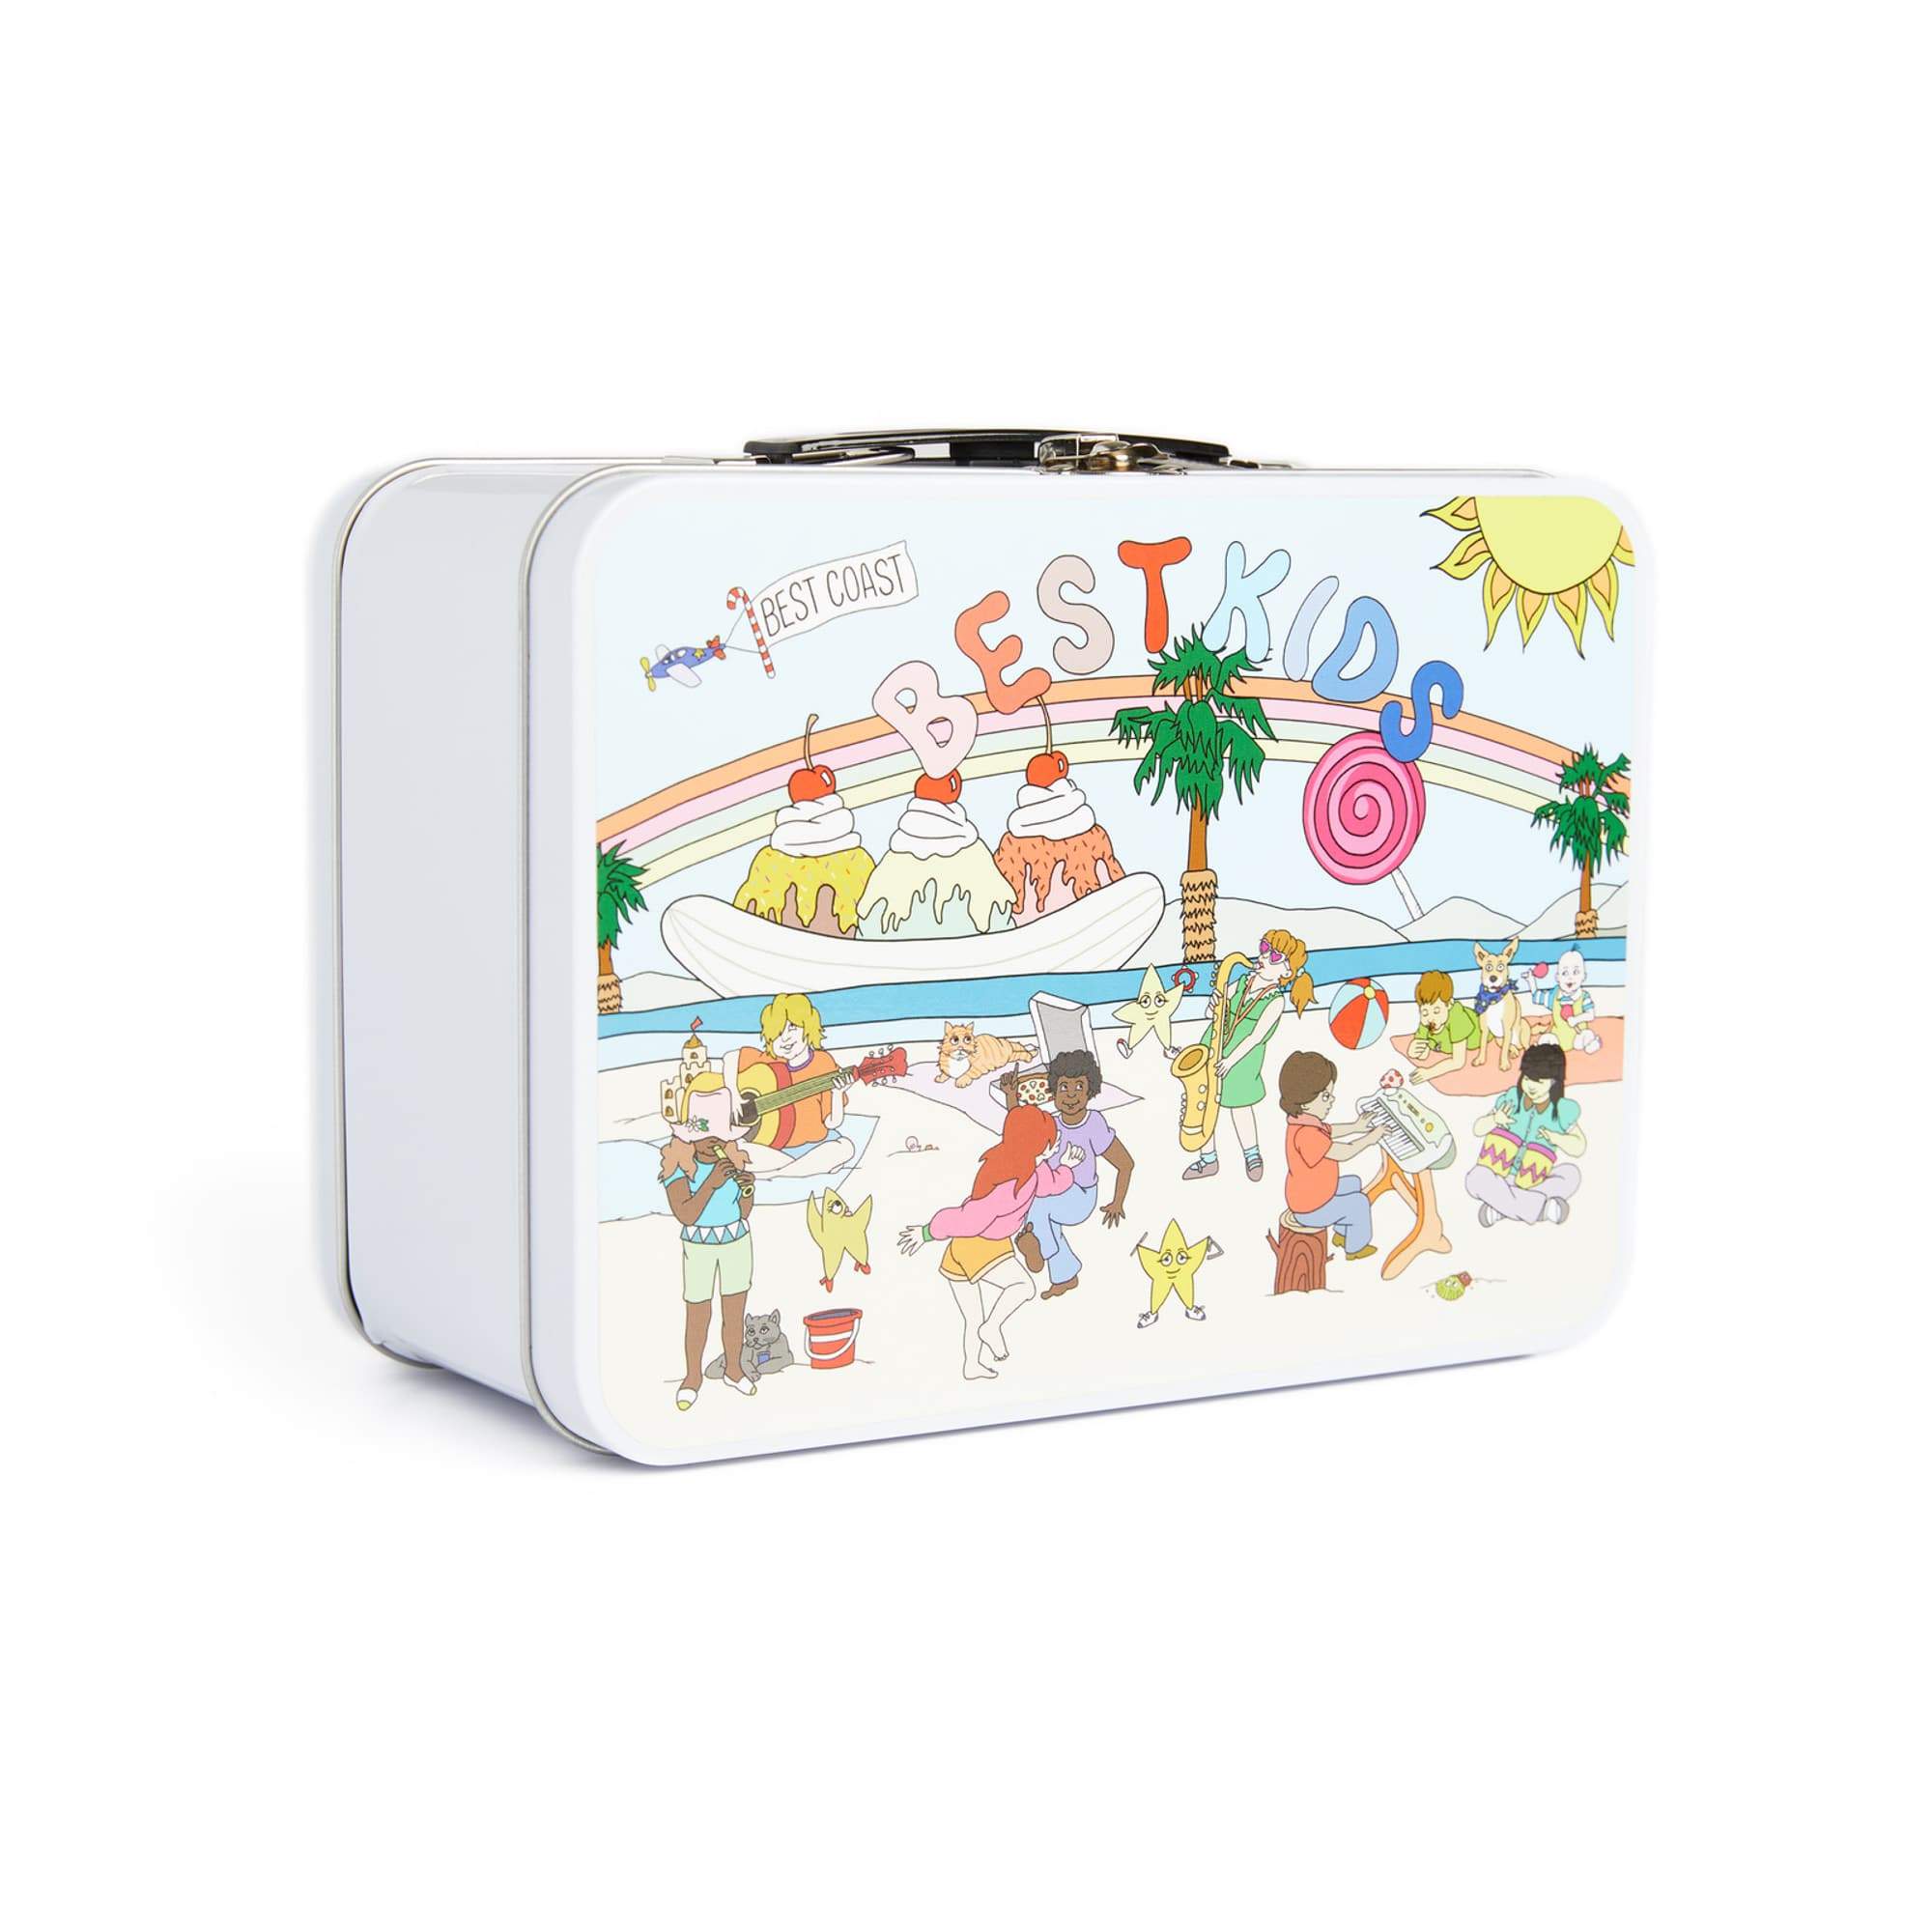 The 14 Best Lunch Boxes to Shop Now